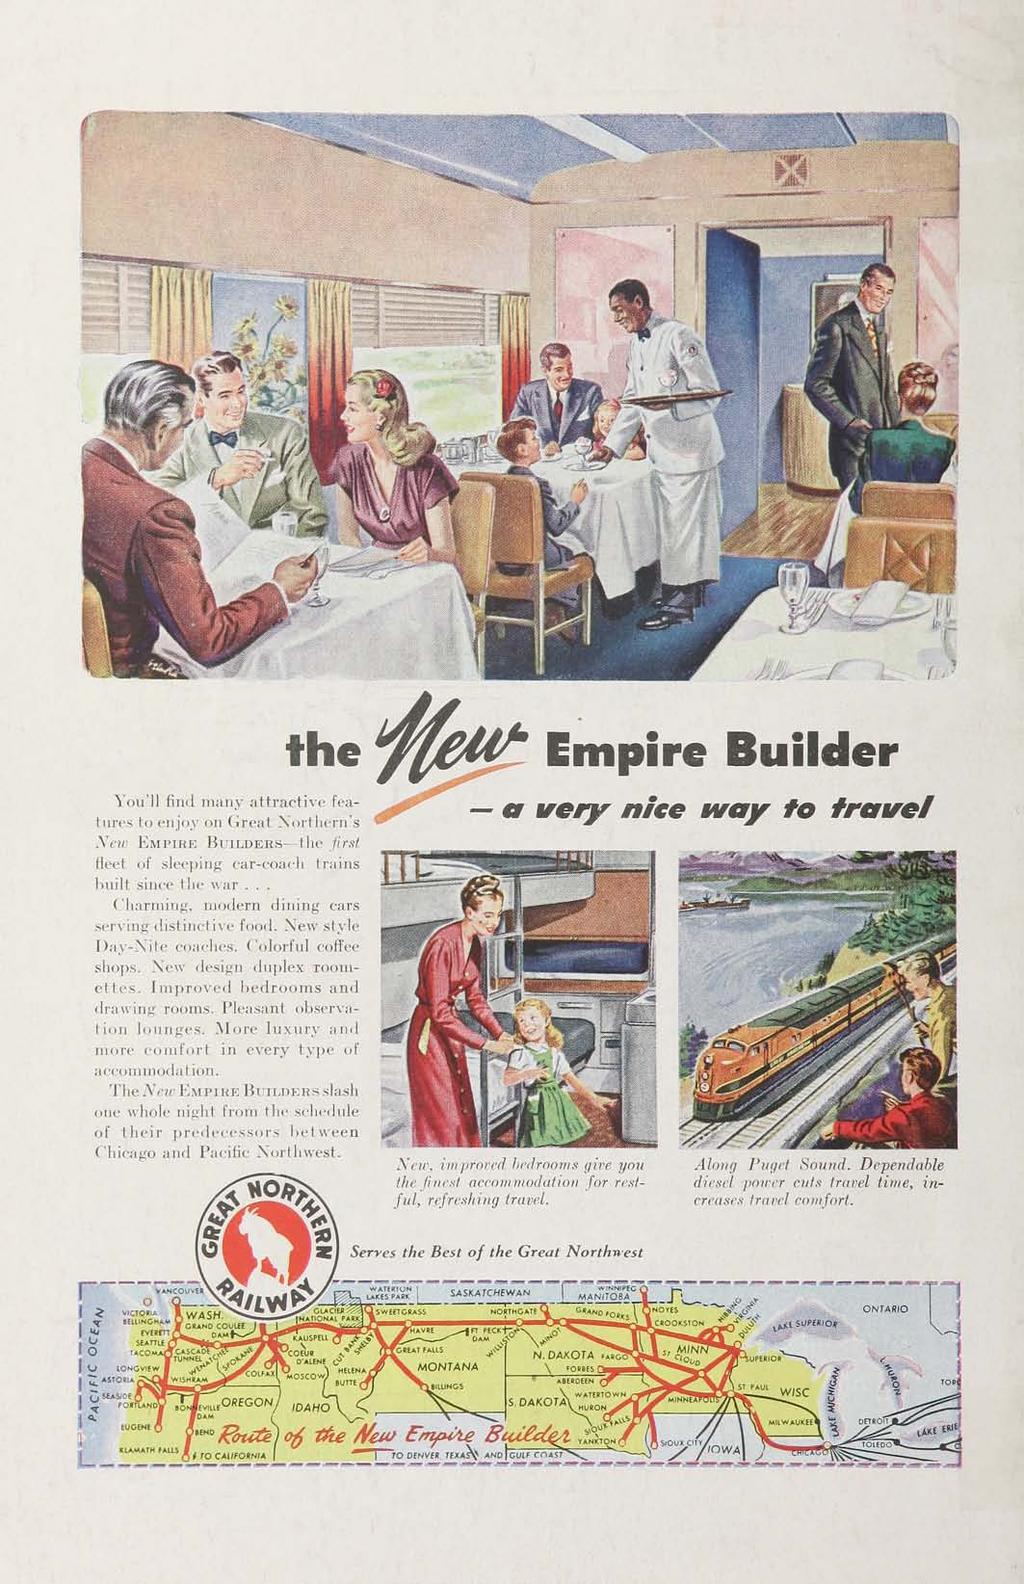 the Empire Builder You'll find many attractive fea tures to enjoy on Great Northern's Neiv Empire Builders the first fleet of sleeping car-coaeli trains built since the war.